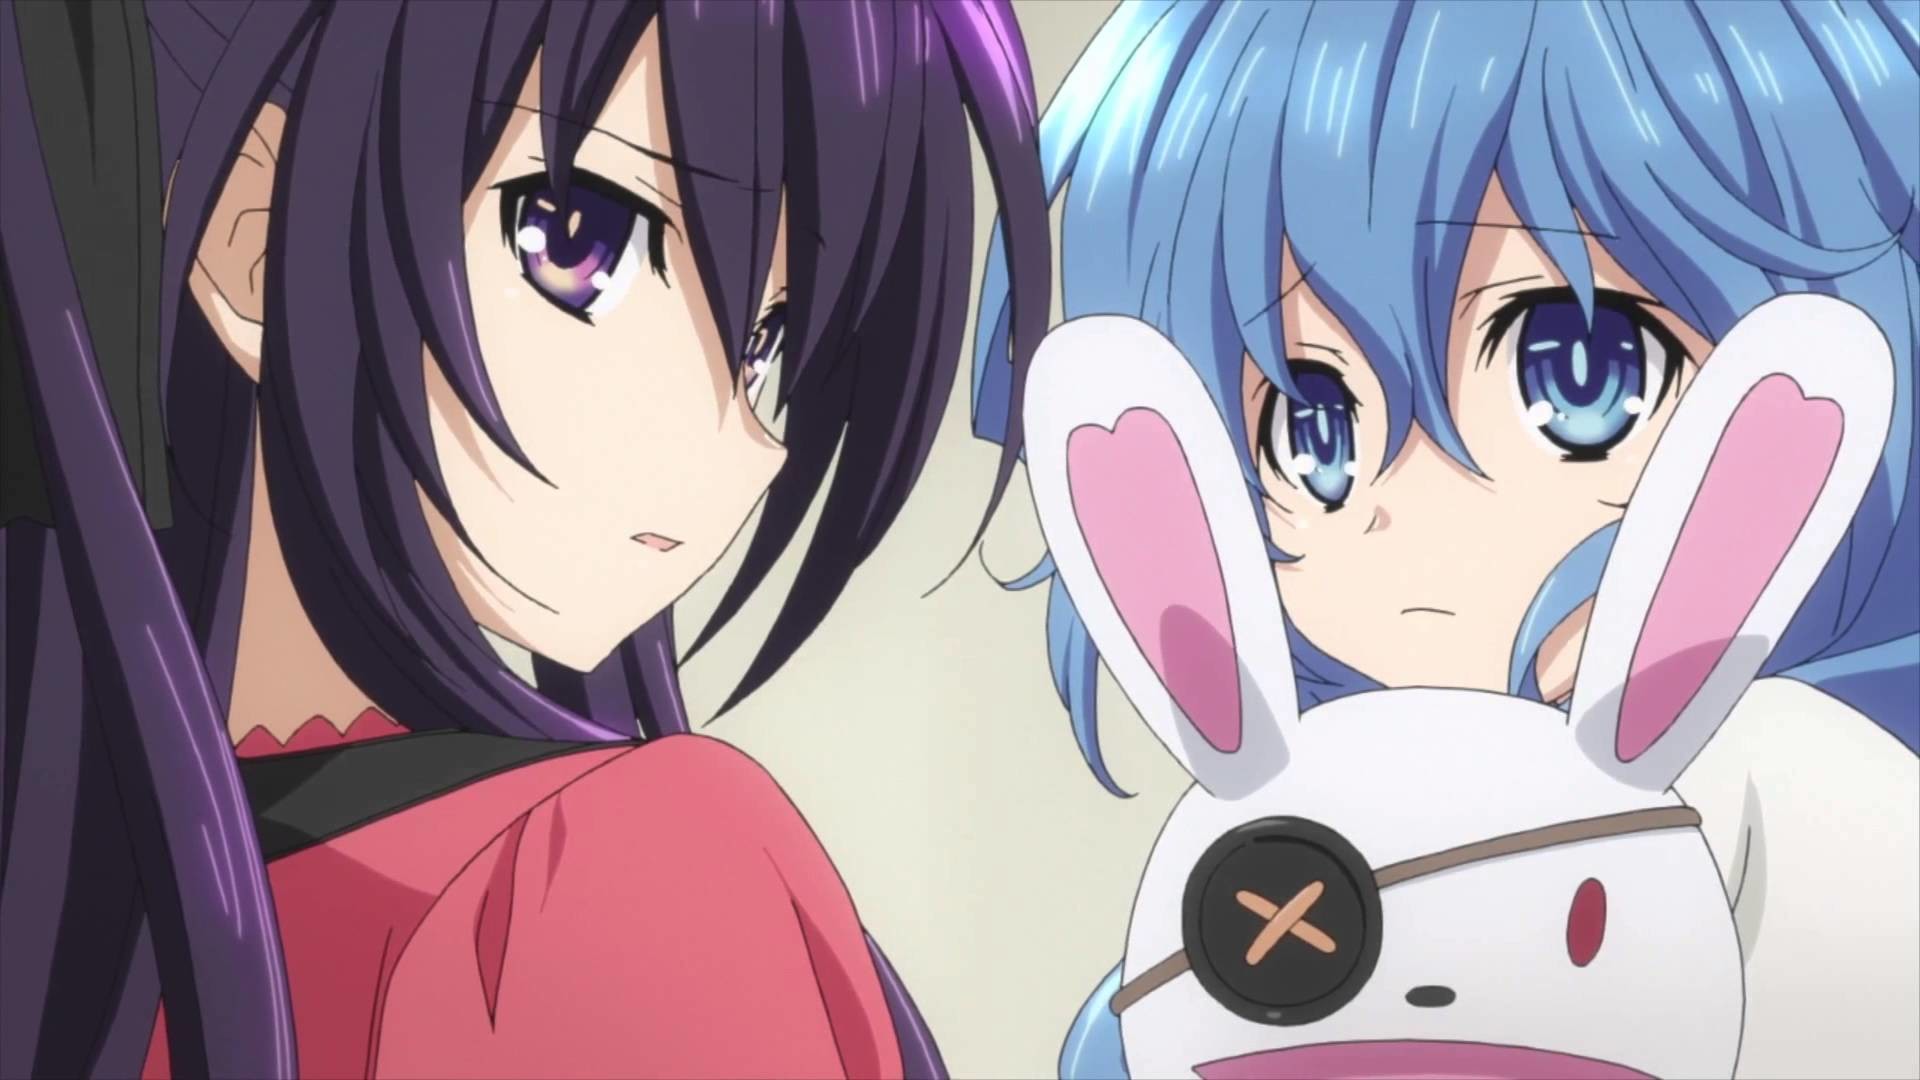 1920x1080 [Director's Cut] Date A Live - Yoshino and Tohka Wants to go to the Hot  Spring